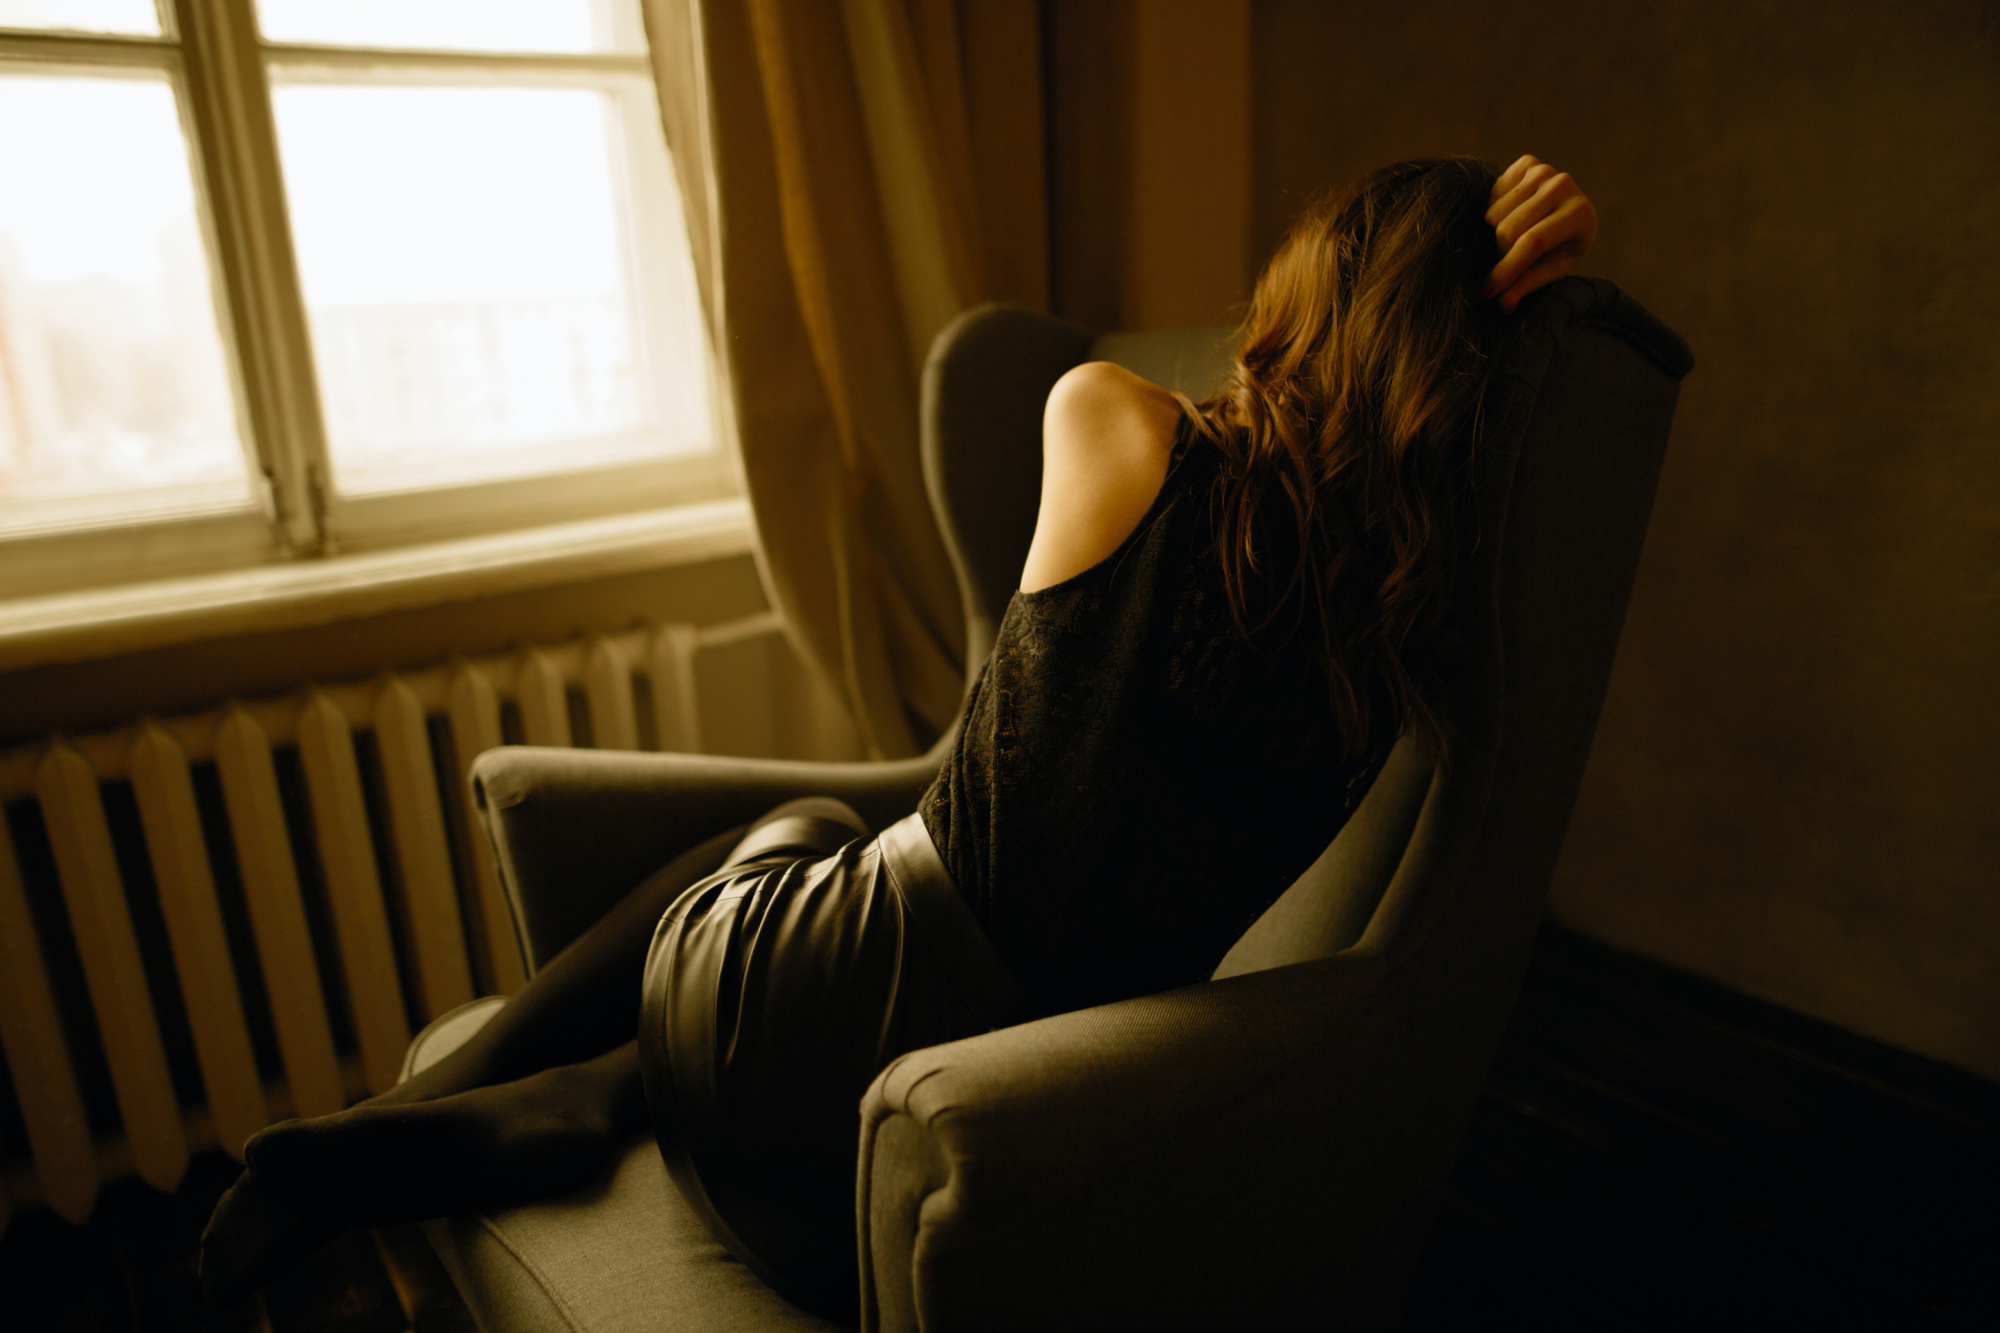 Depressed woman huddled in a chair, contemplating her unhappy marriage.